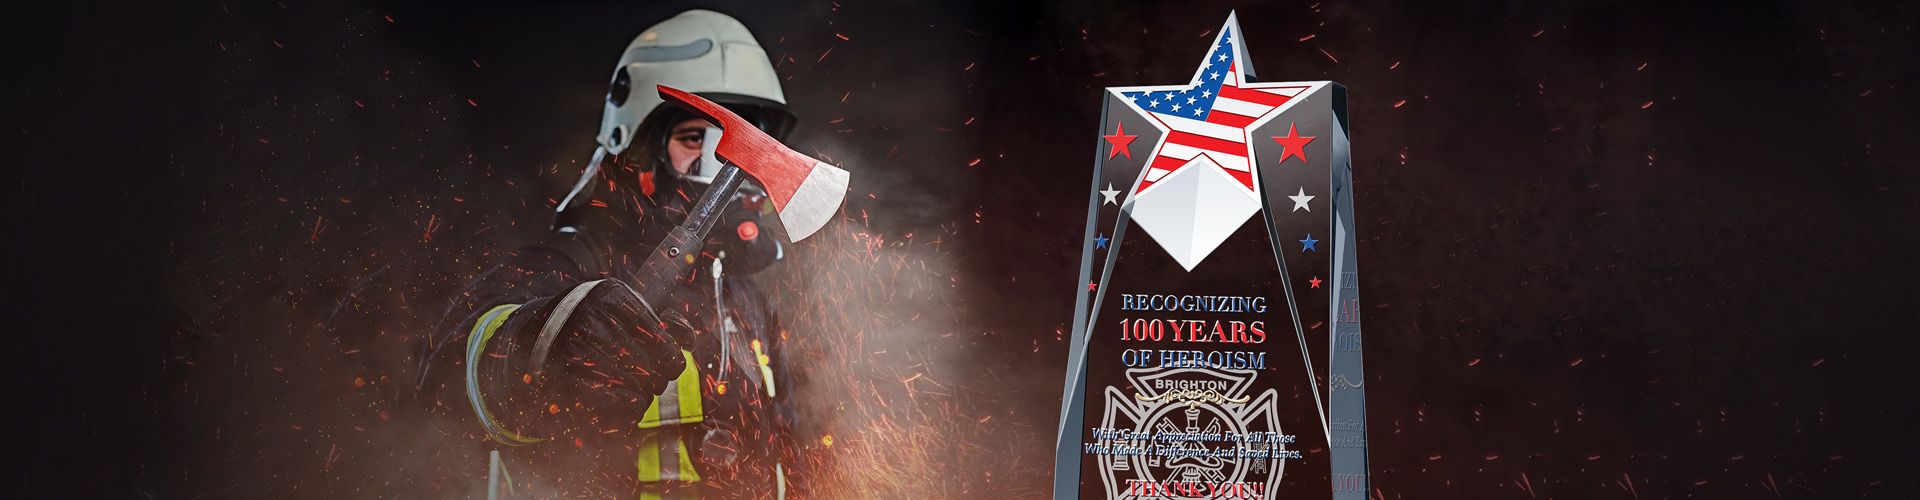 Gift Plaques & Customized Crystal Awards for Firefighters - Banner 1